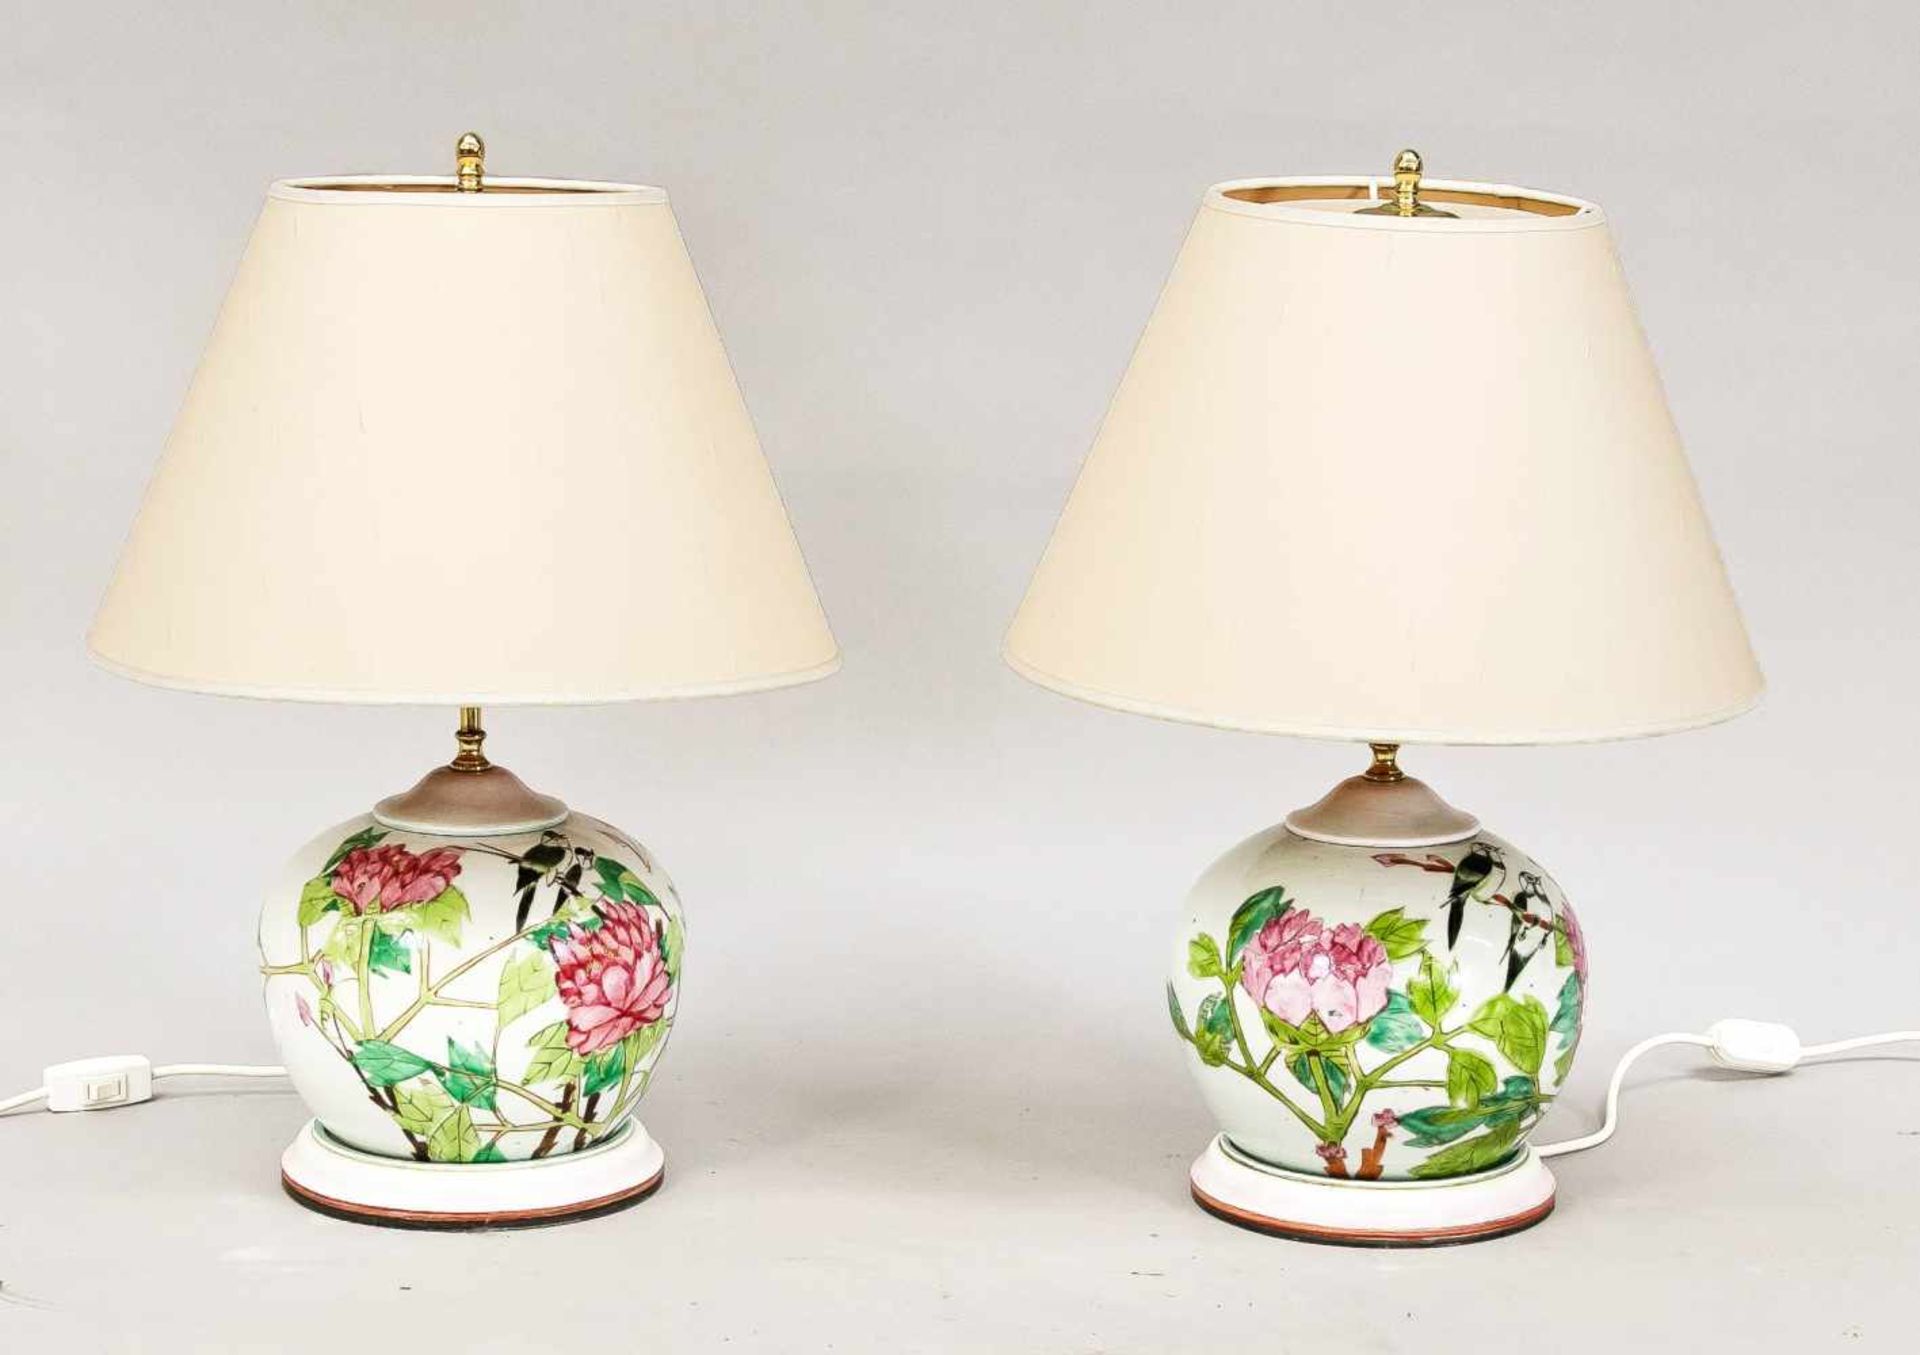 Pair of vase lamps, China, bulbous body, famille rose, electr., Yellow fabric lampshade,